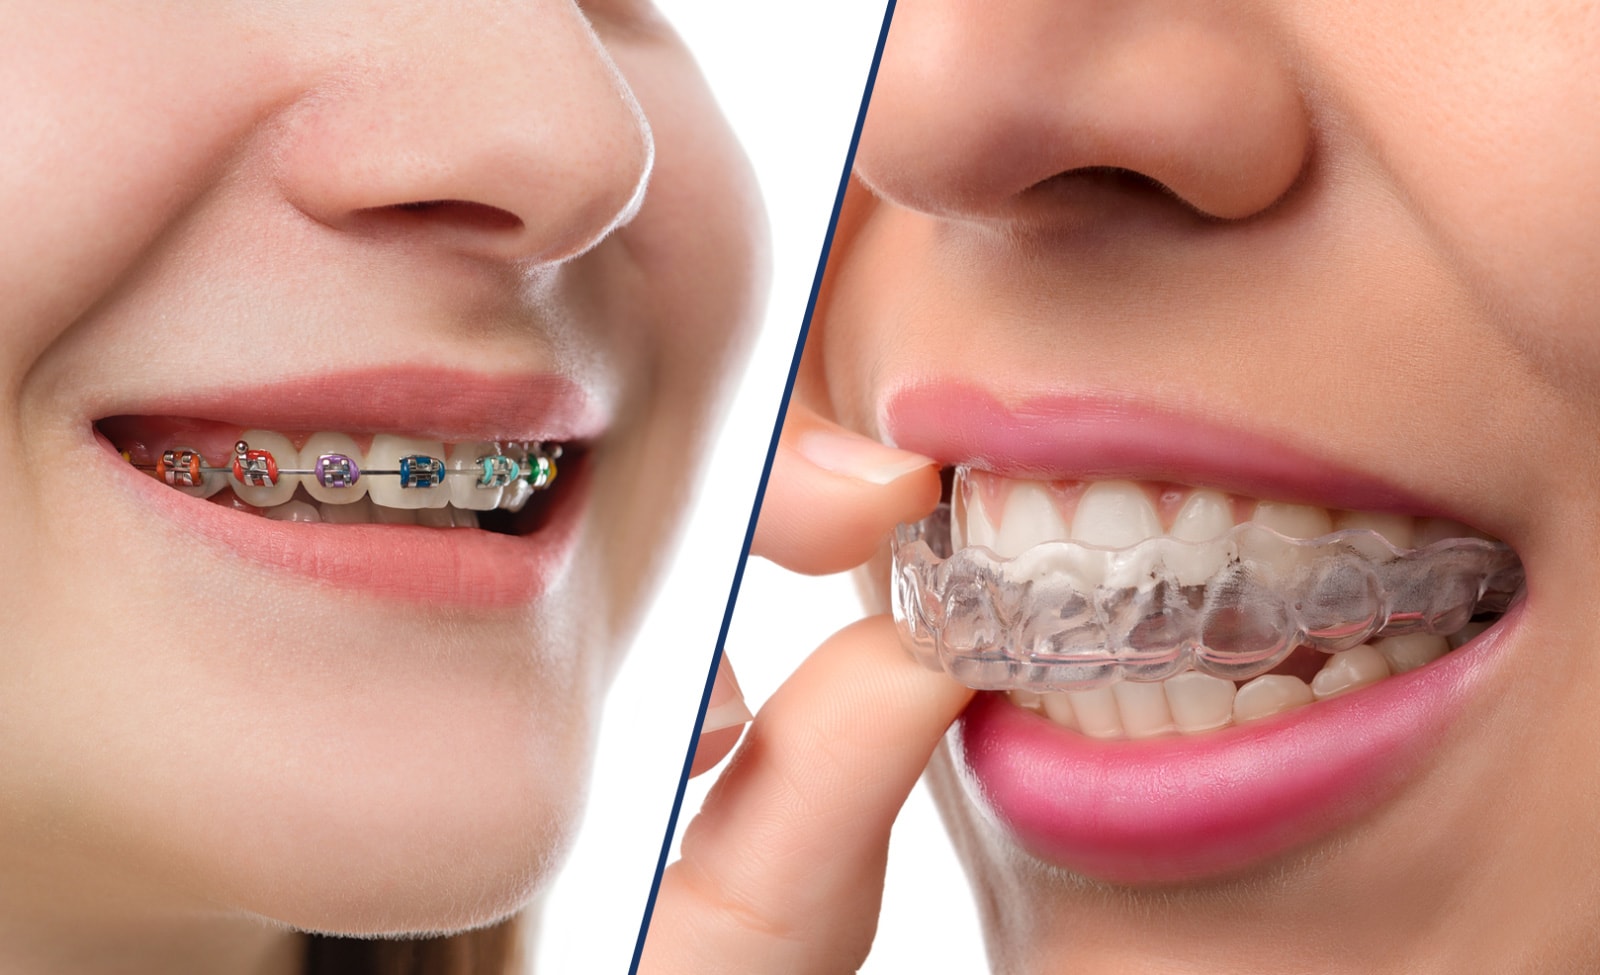 Braces versus Invisalign: Which is Better?